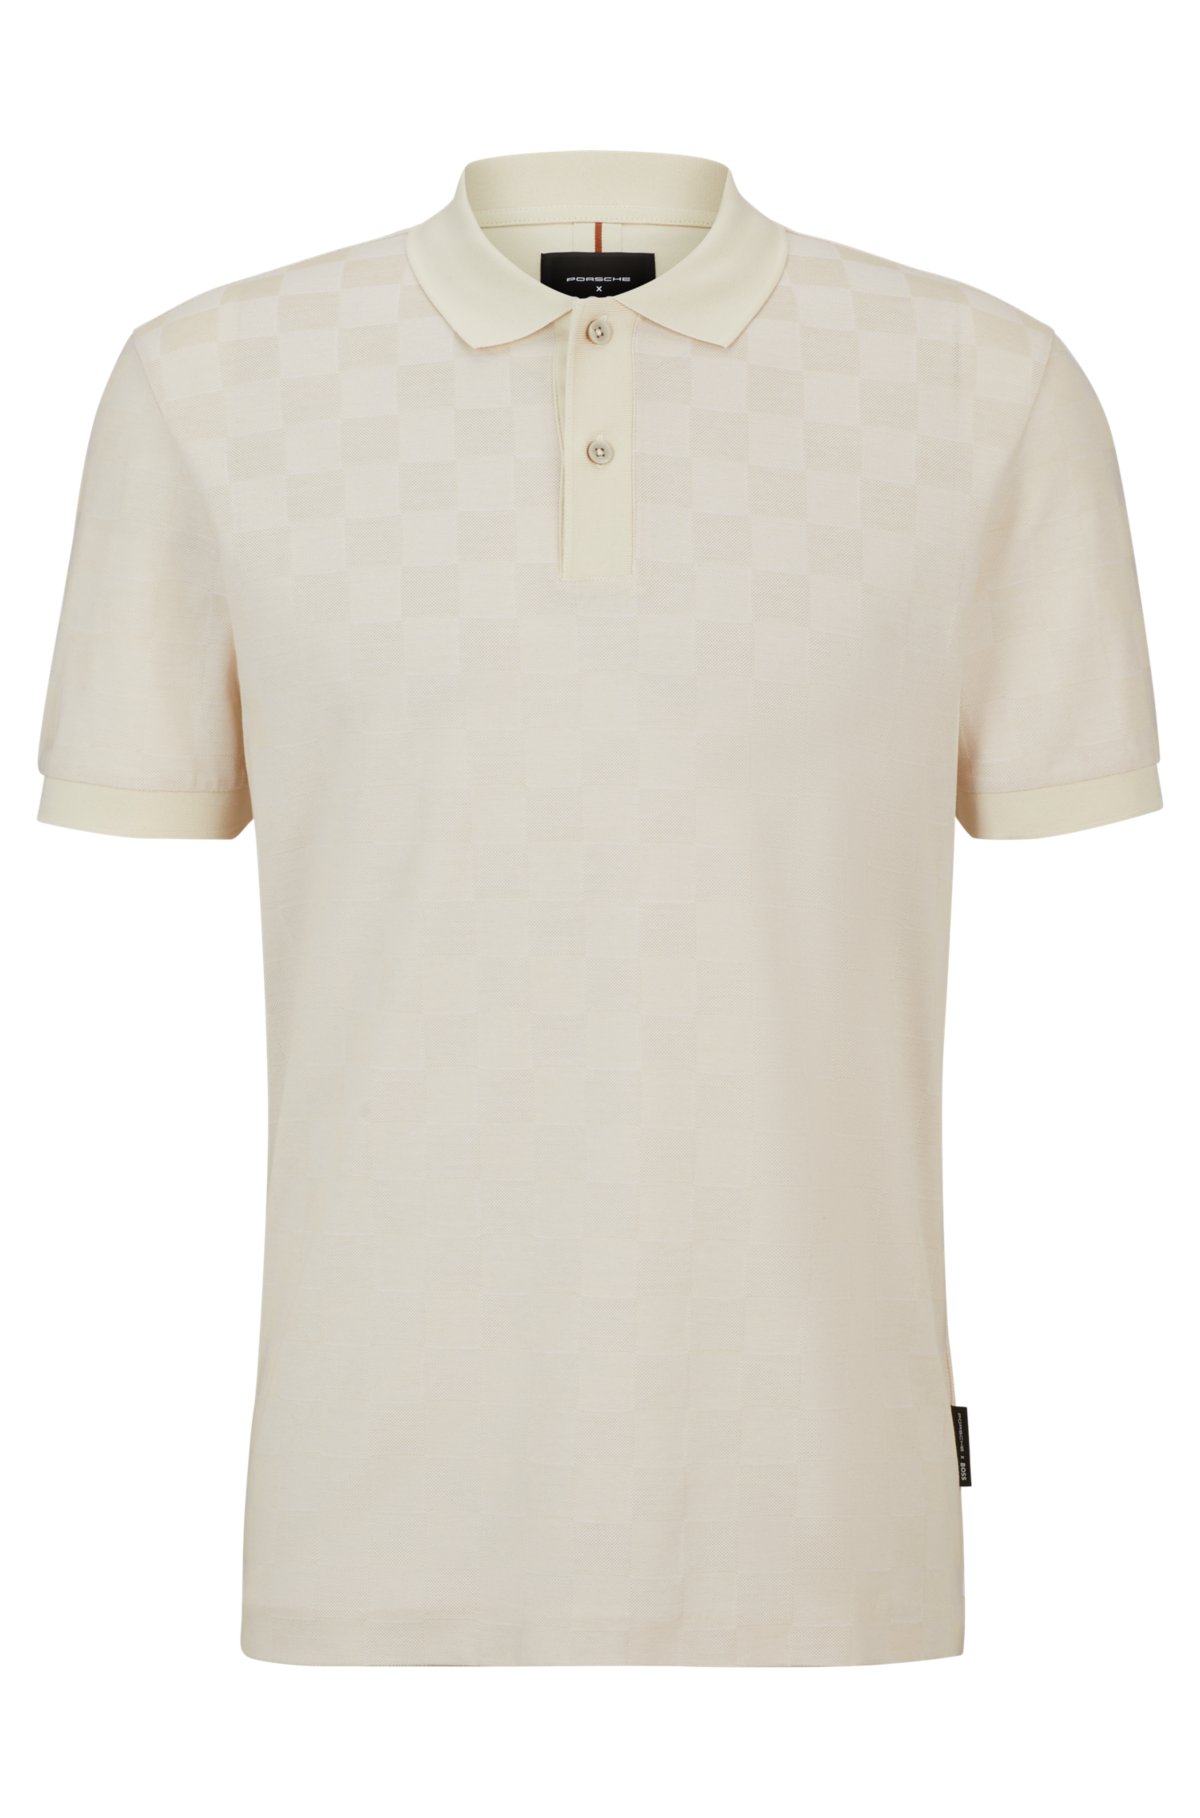 Porsche x BOSS mercerised-cotton polo shirt with check structure, Natural